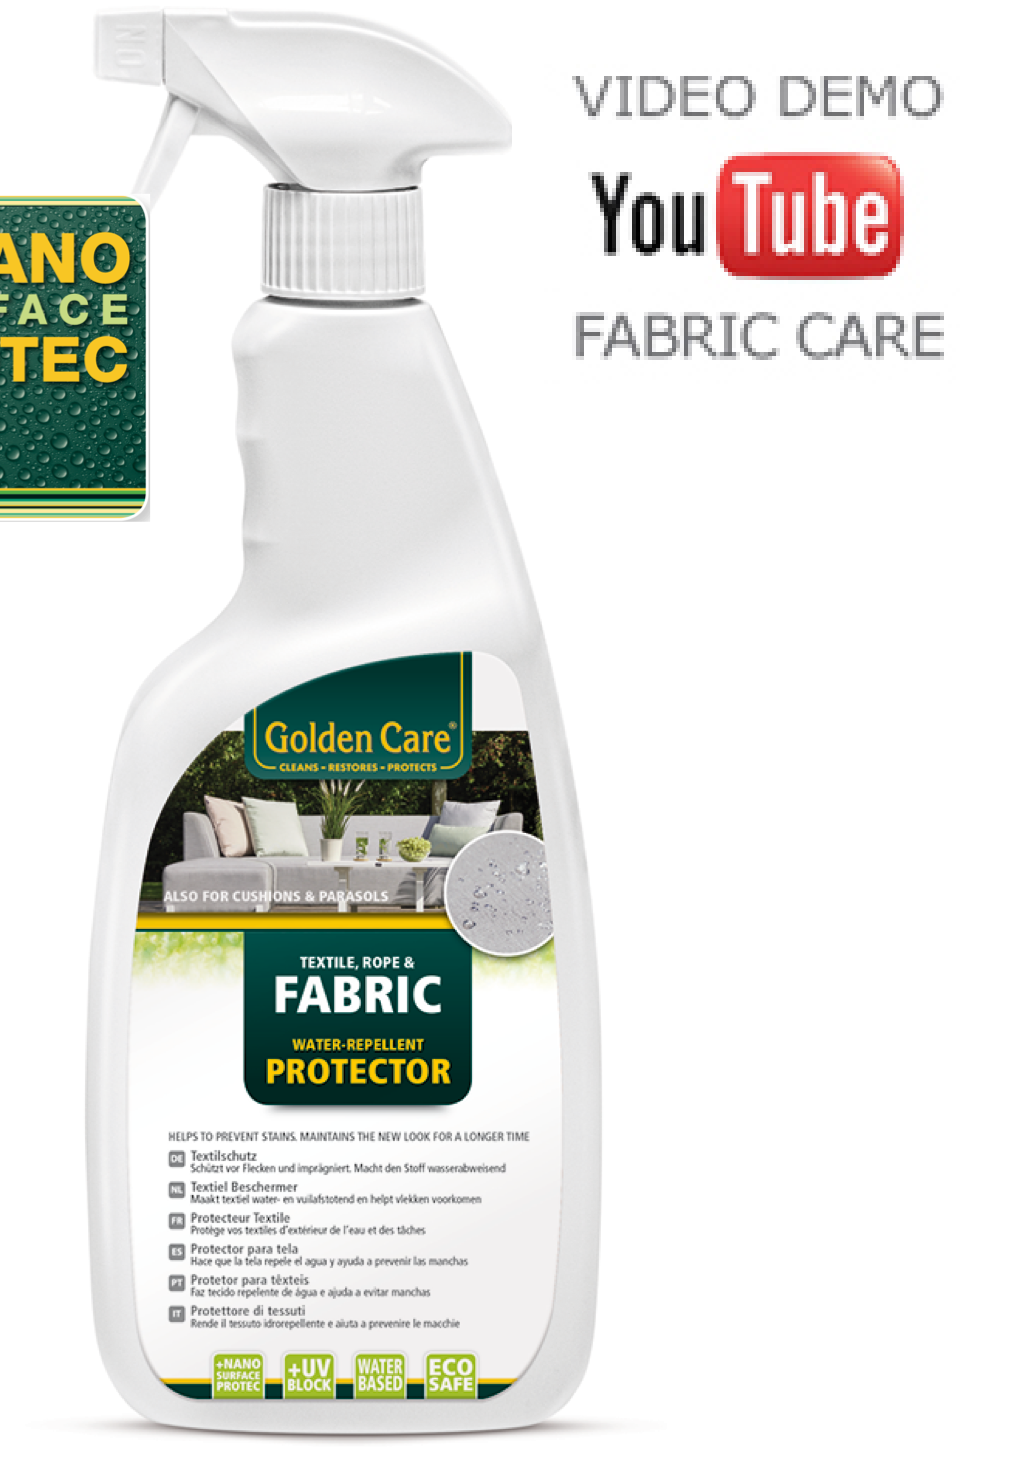 Golden Care Fabric Protector